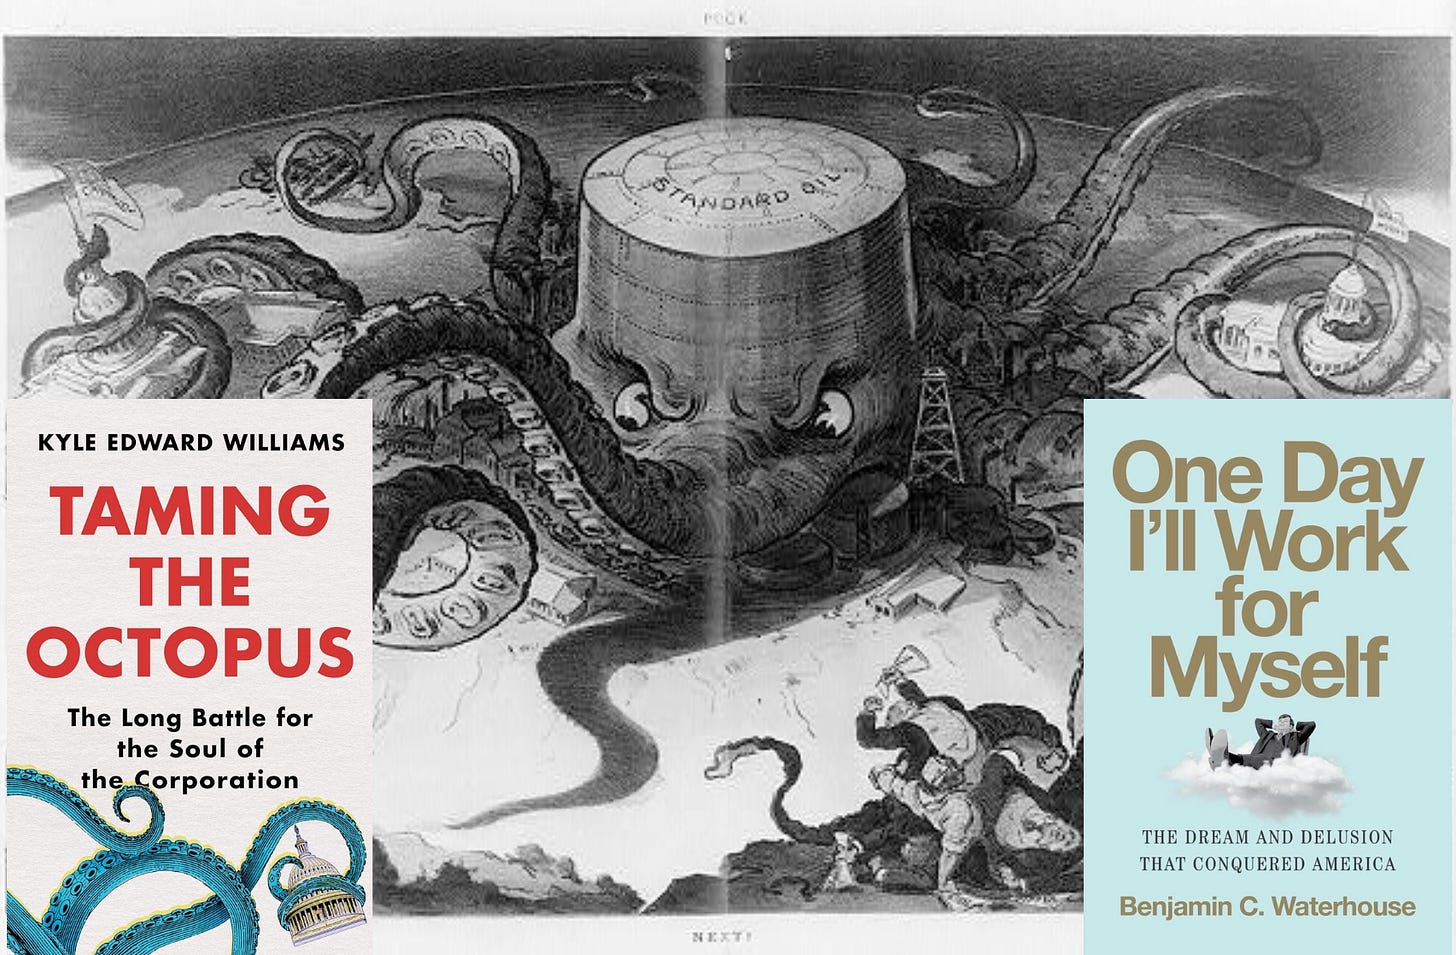 A 1904 Standard Oil cartoon, and the cover images of Taming the Octopus and One Day I'll Work for Myself.